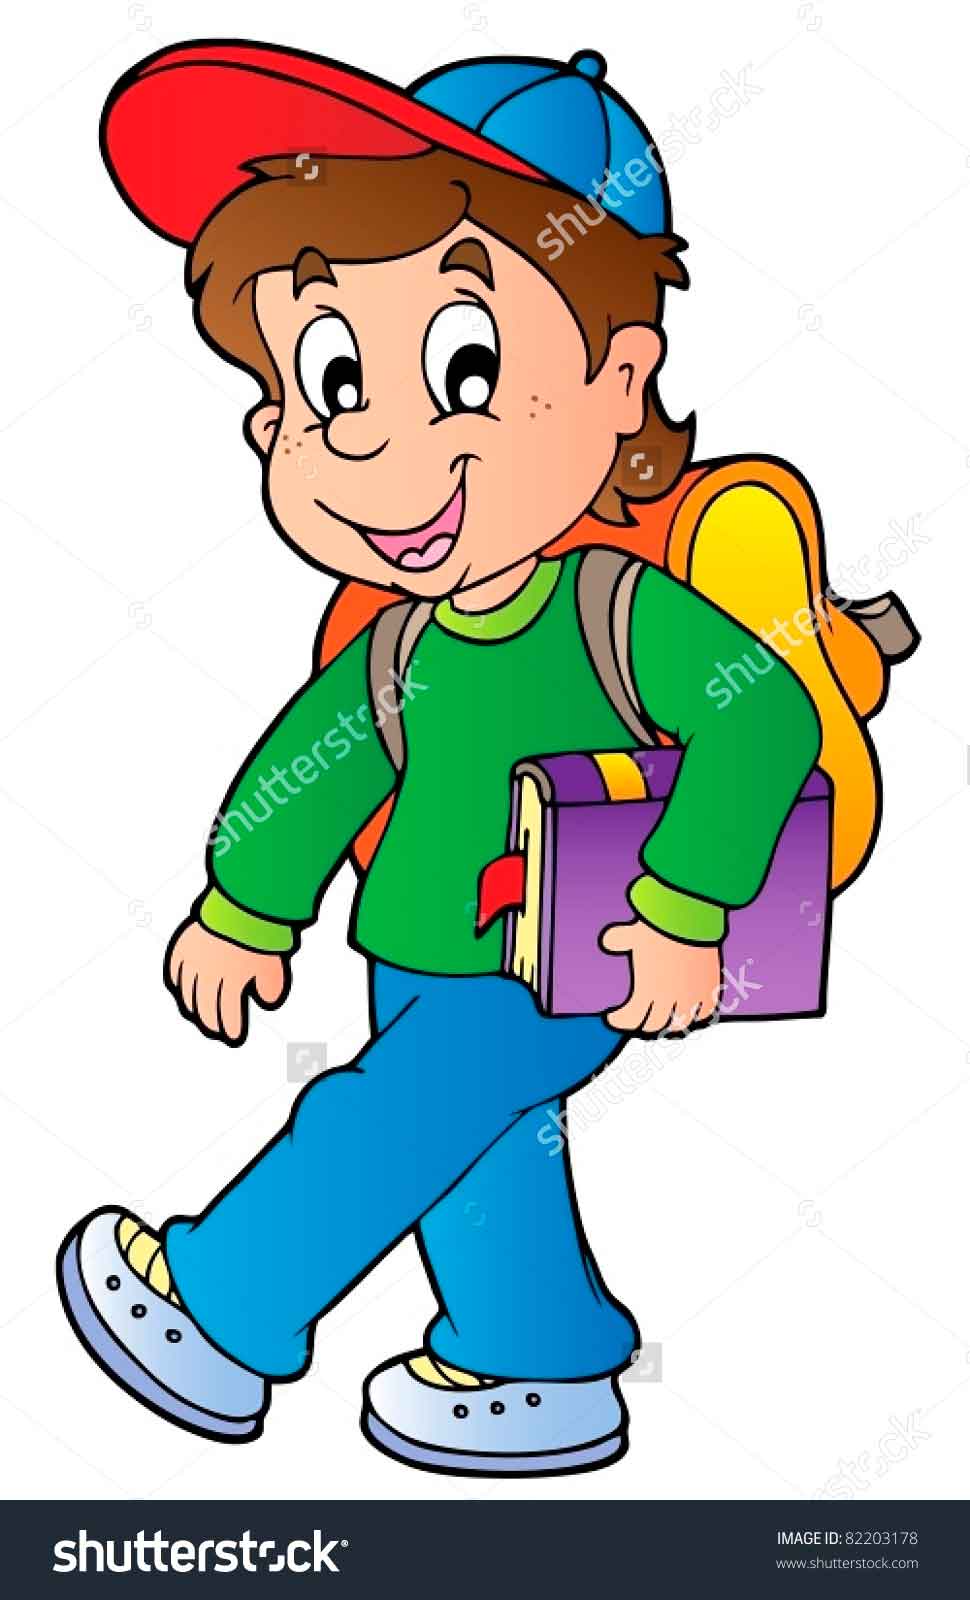 Child walking to school clipart.